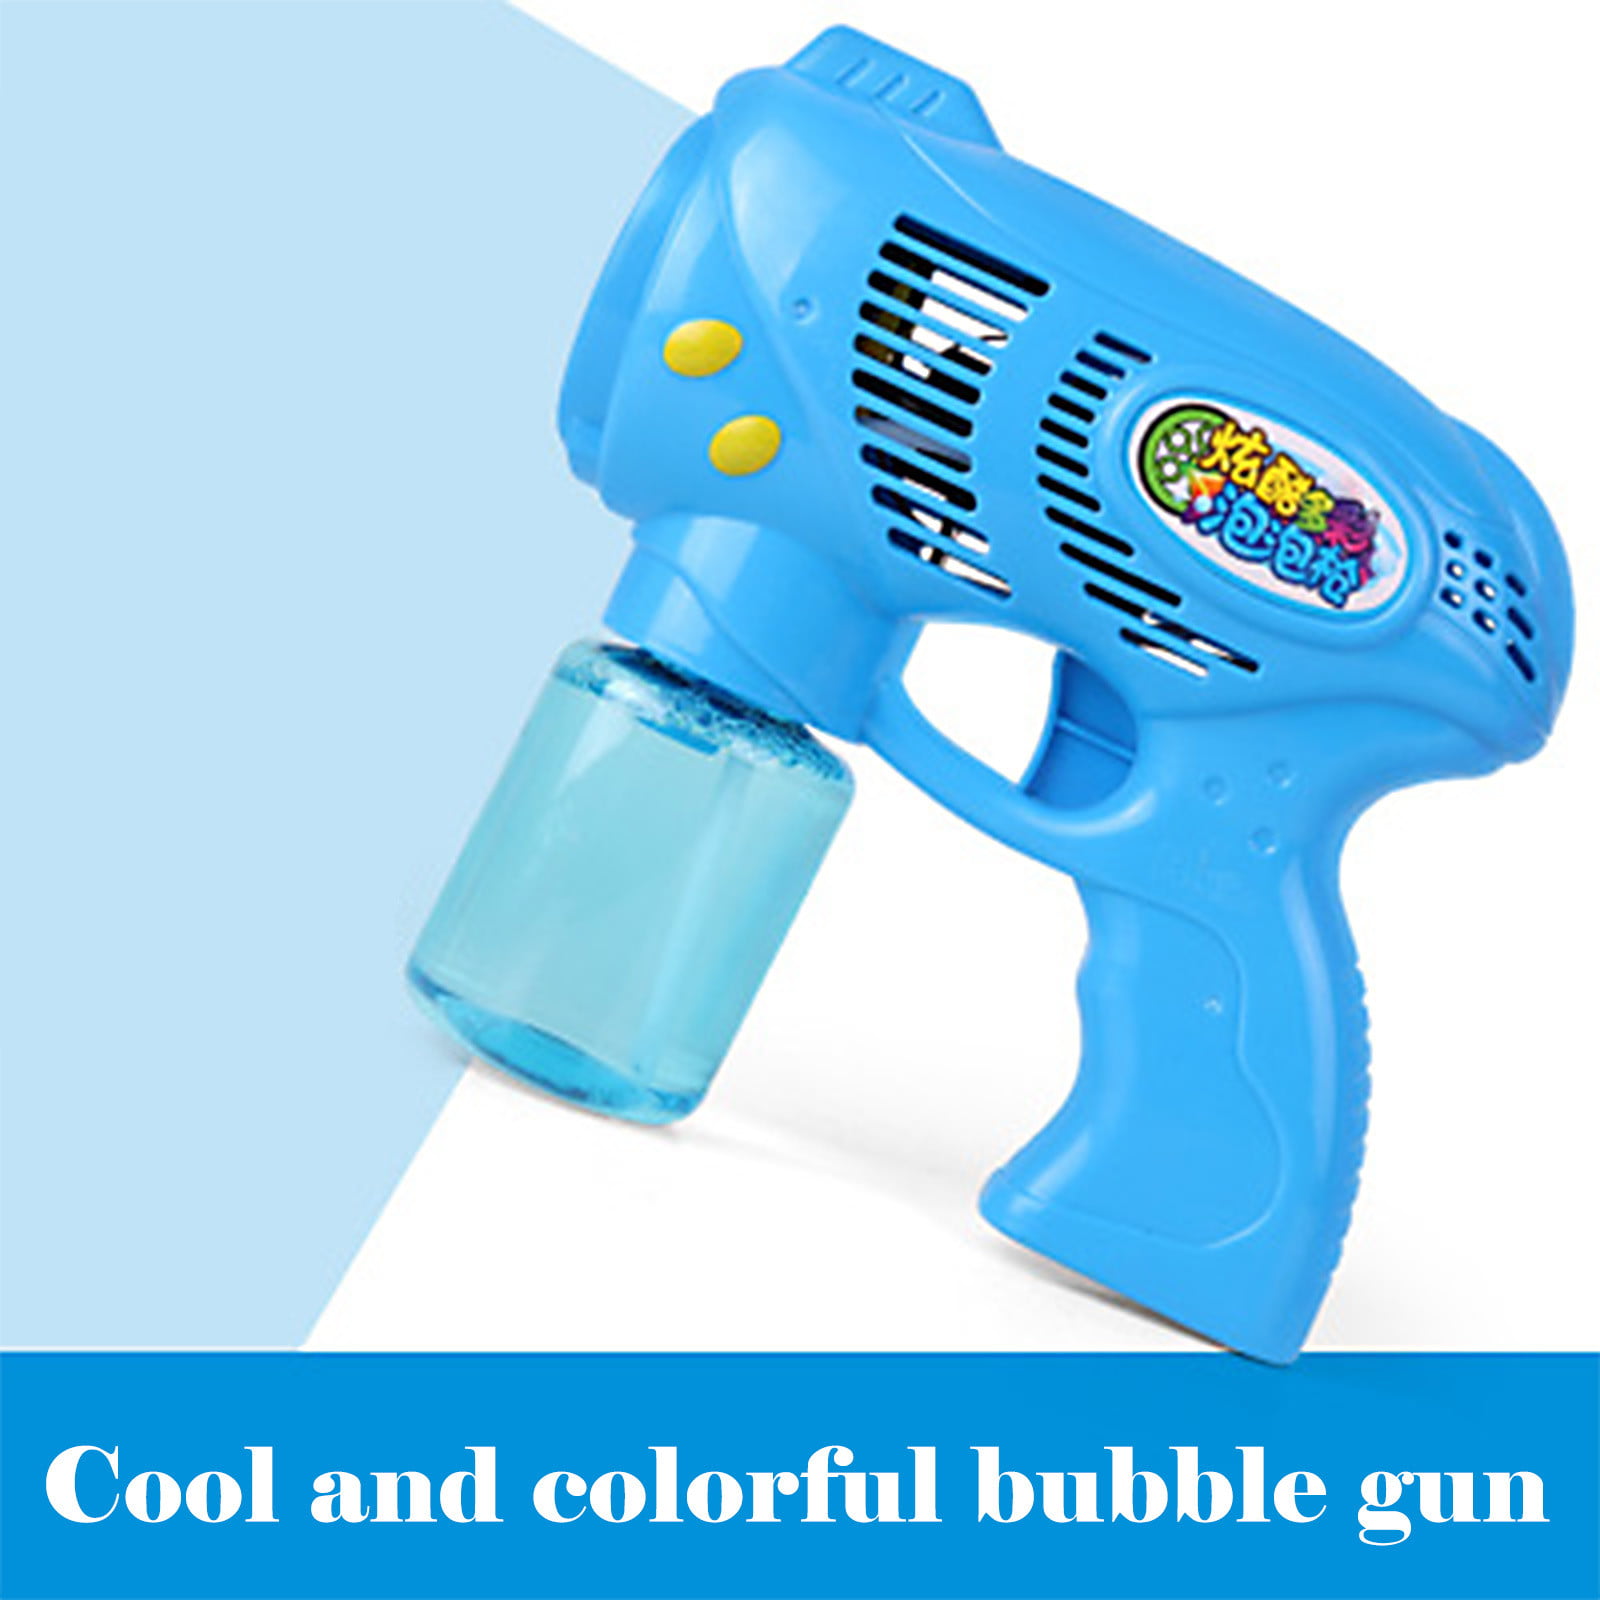 Voberry Bubble Machine Durable Bubble Maker with 1 Bottles of Bubbles Solution Refill Children Kids Outdoor Toy Pig Automatic Bubble Blower Maker Music Machine Bath Children Kids Outdoor Toy